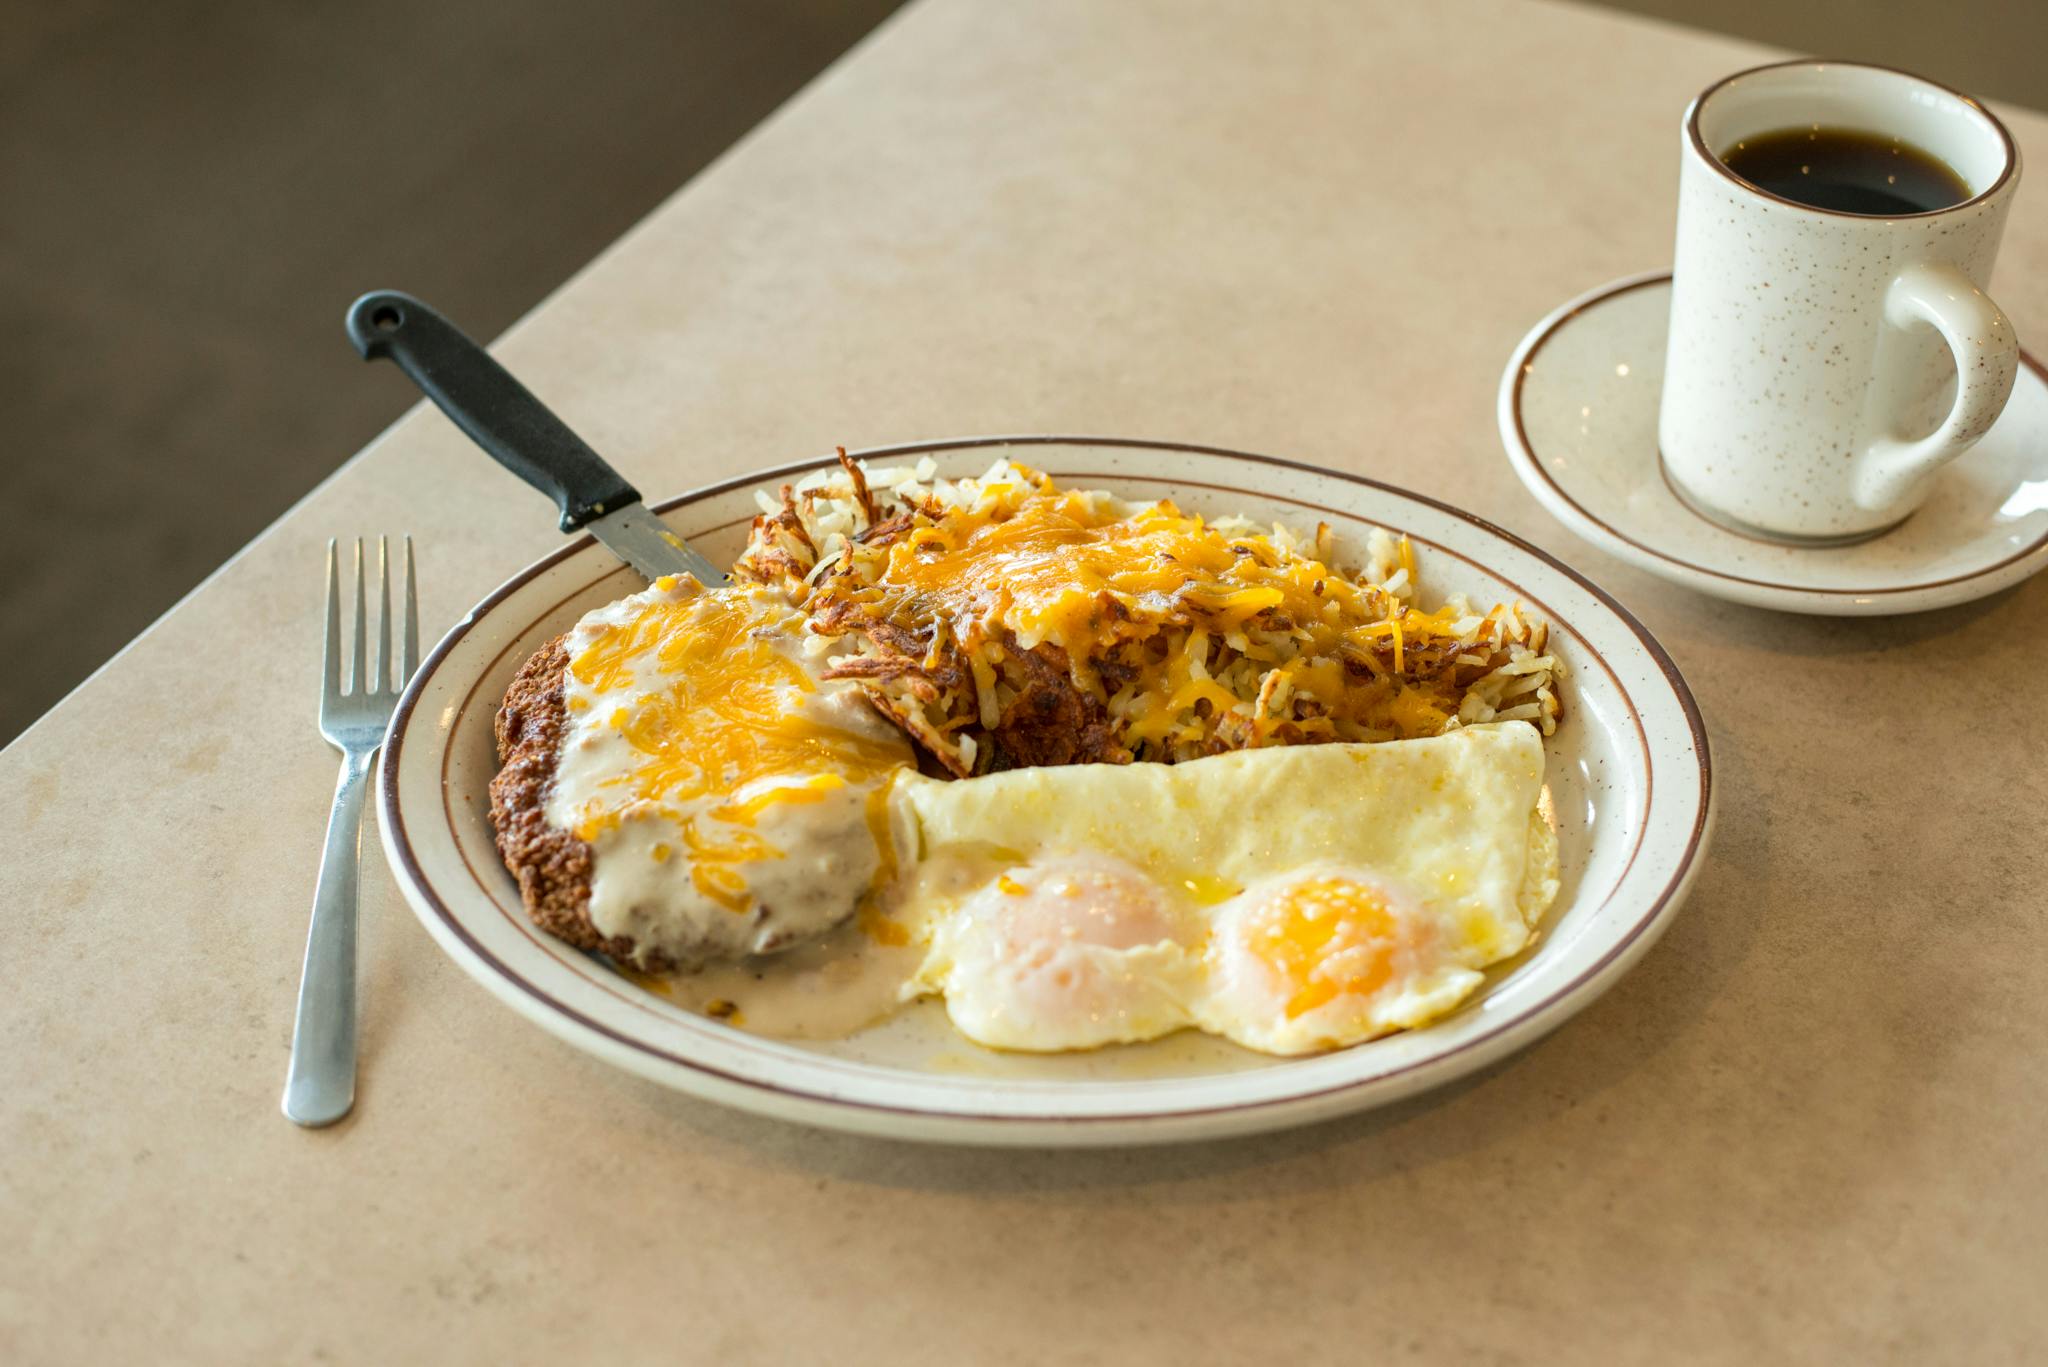 Country Fried Steak Breakfast from The Pancake Place in Green Bay, WI